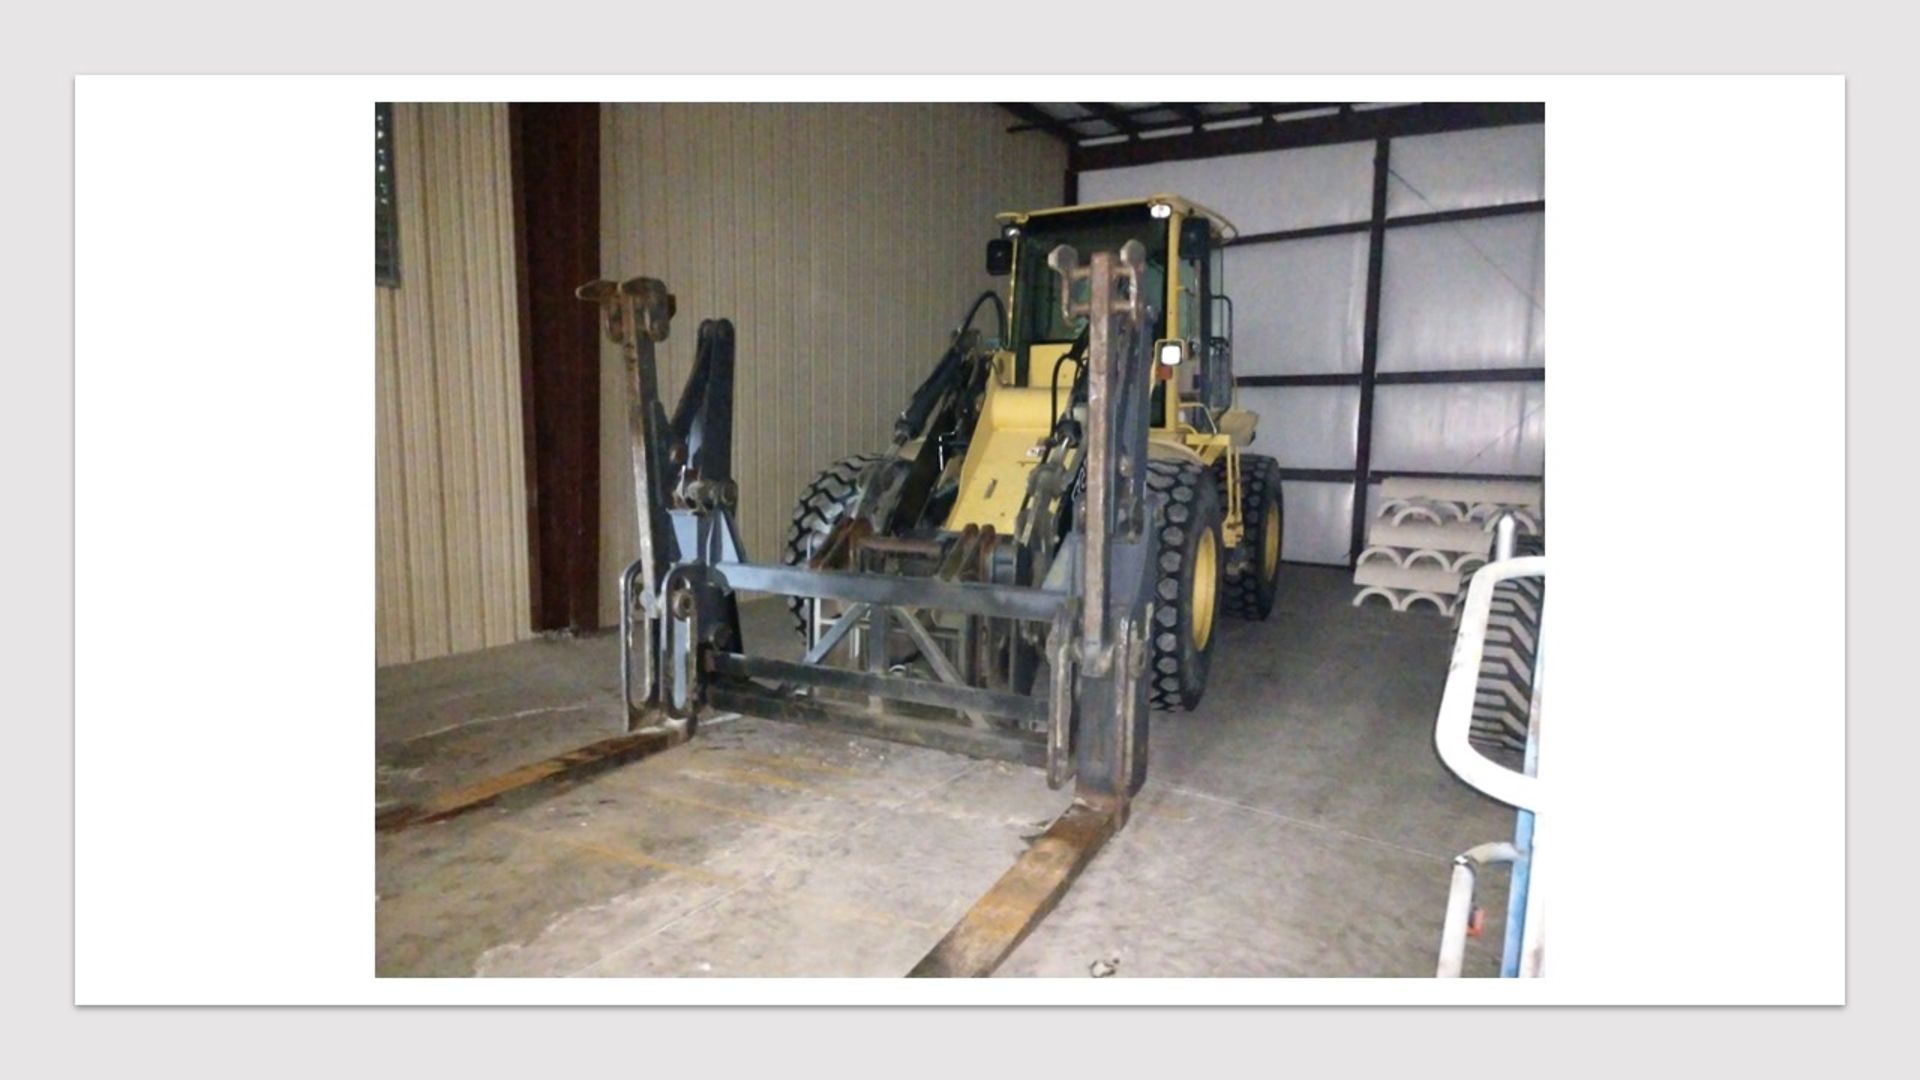 John Deere Model TC54H Front End Loader with Hydraulic Pipe Grapple Fork Attachment, 72" Between